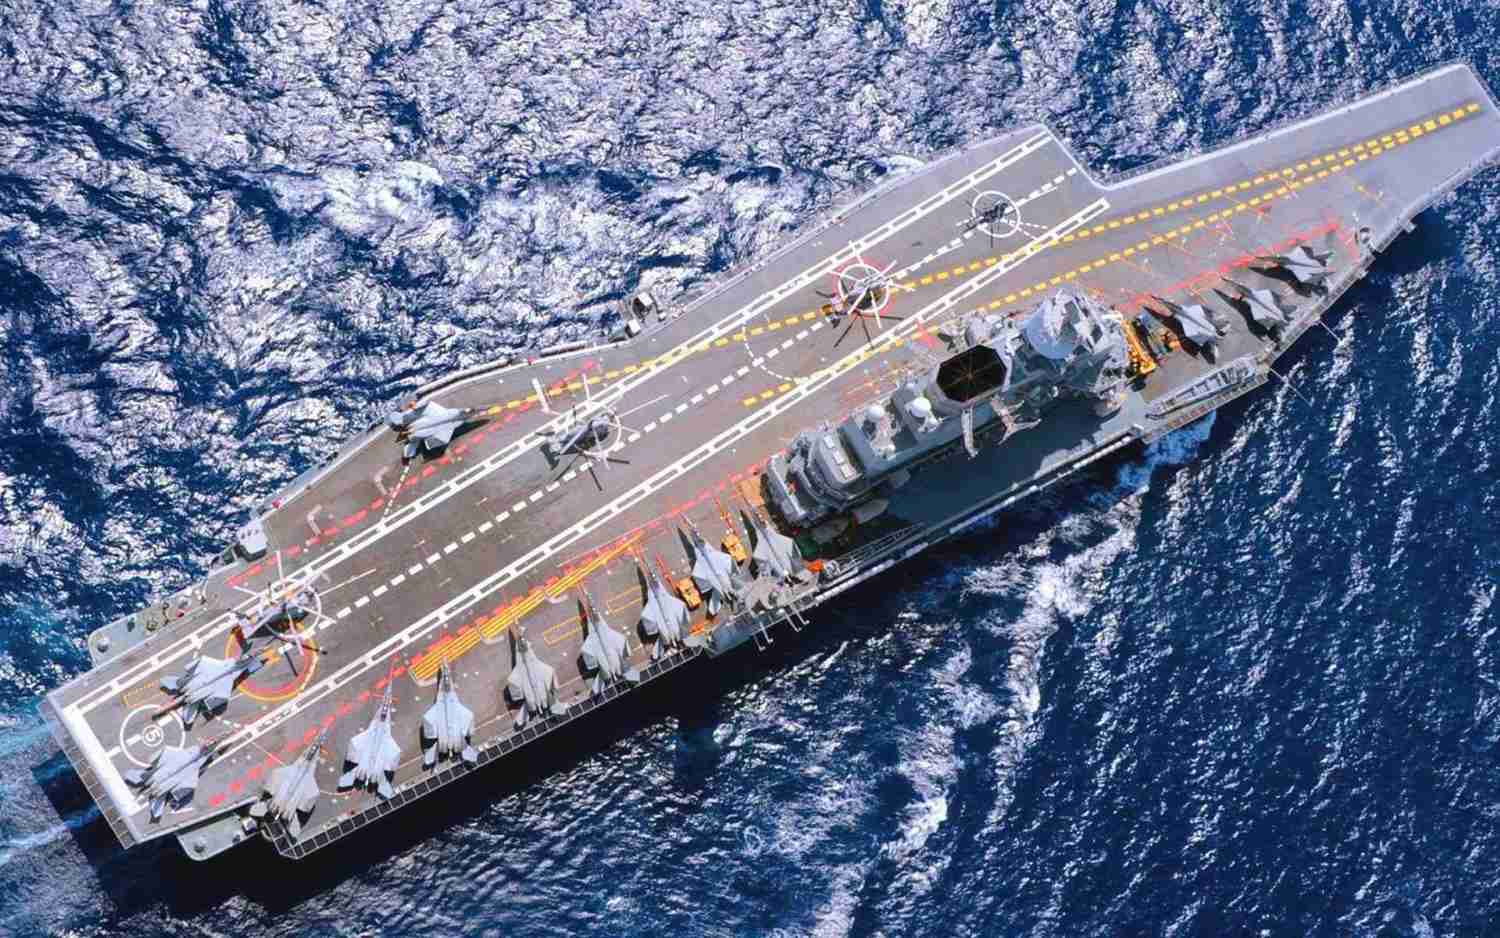 Why does India need a third aircraft carrier?